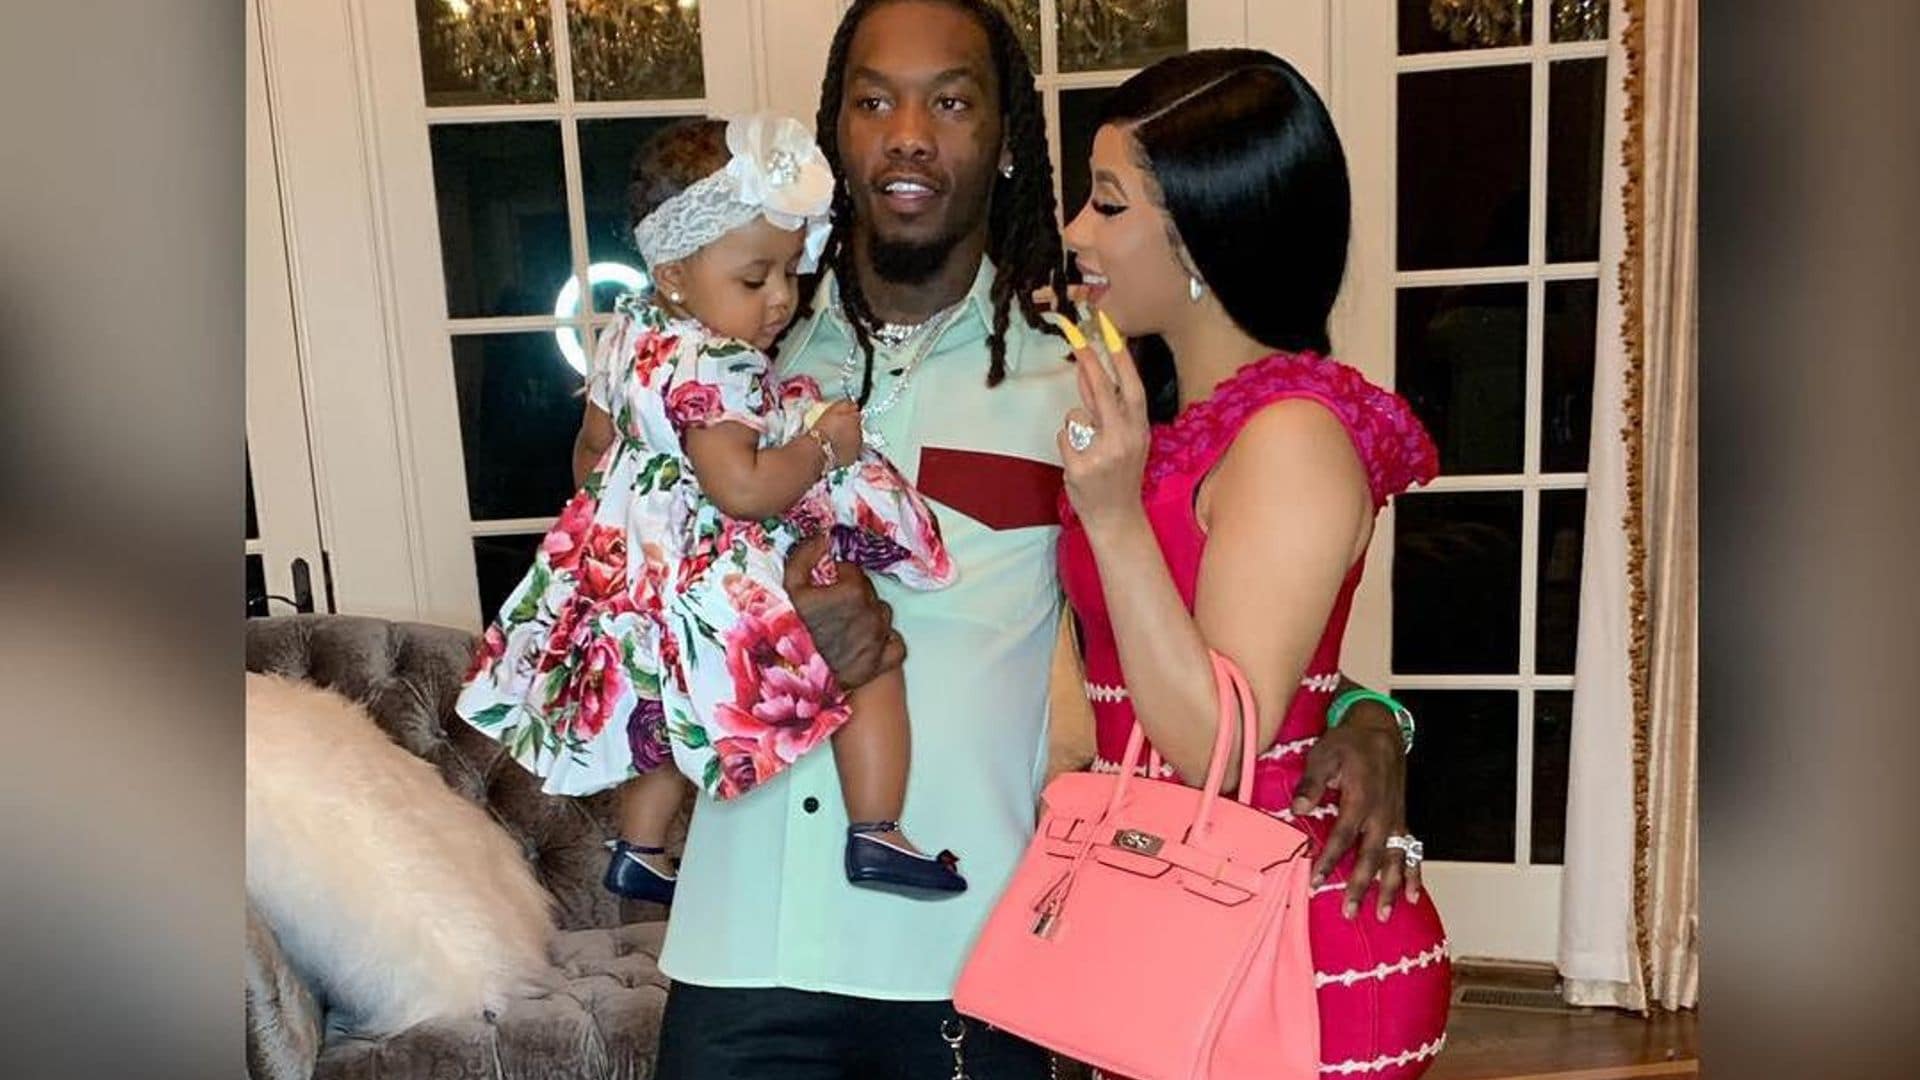 Cardi B’s daughter Kulture serenades her parents after the Grammys